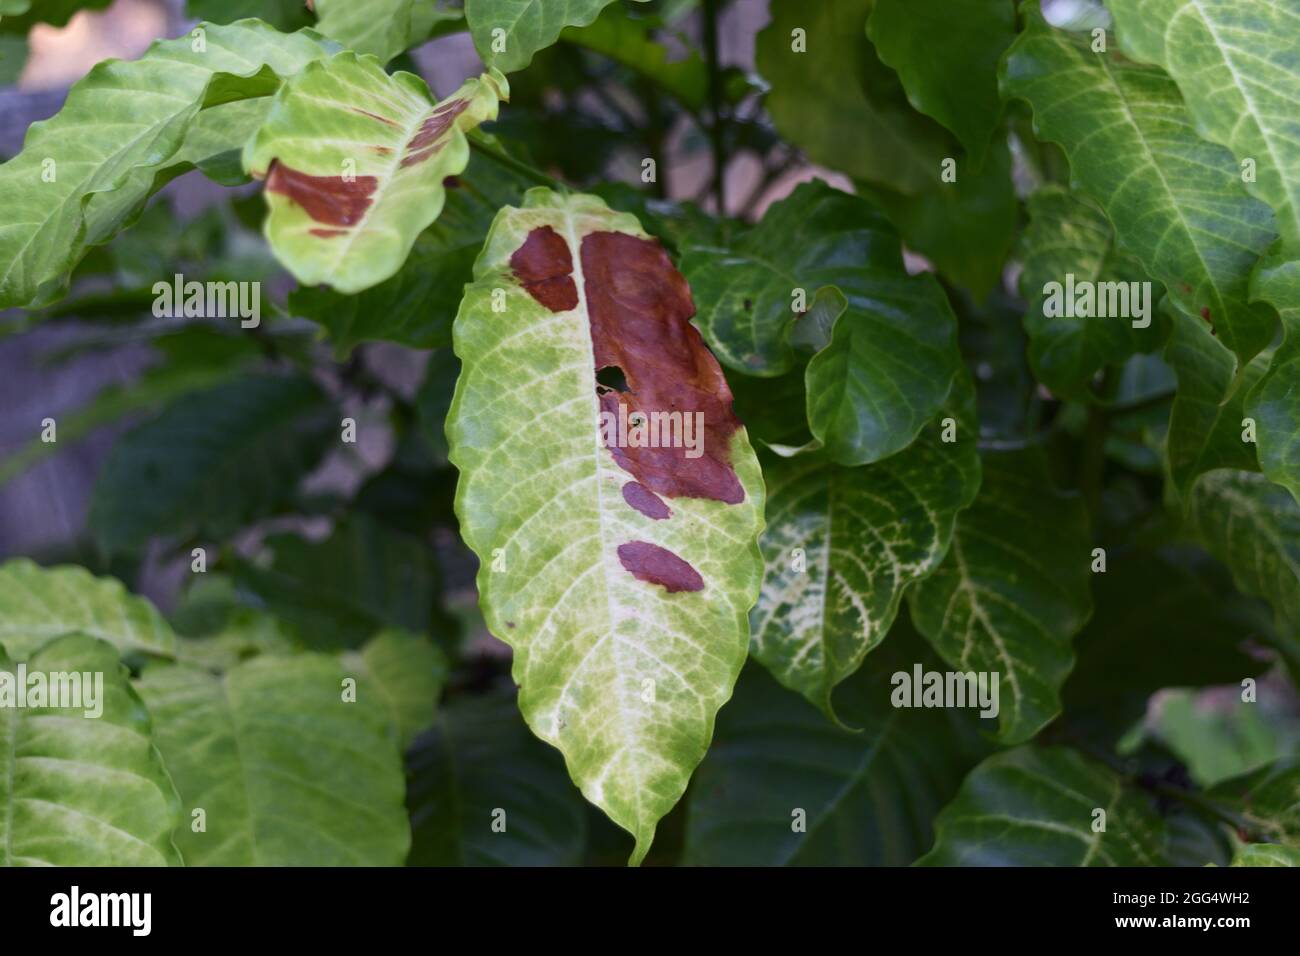 Brown and yellow damage by anthracnose on the green leaf of Robusta coffee plant tree, Plant diseases that damage agriculture Stock Photo